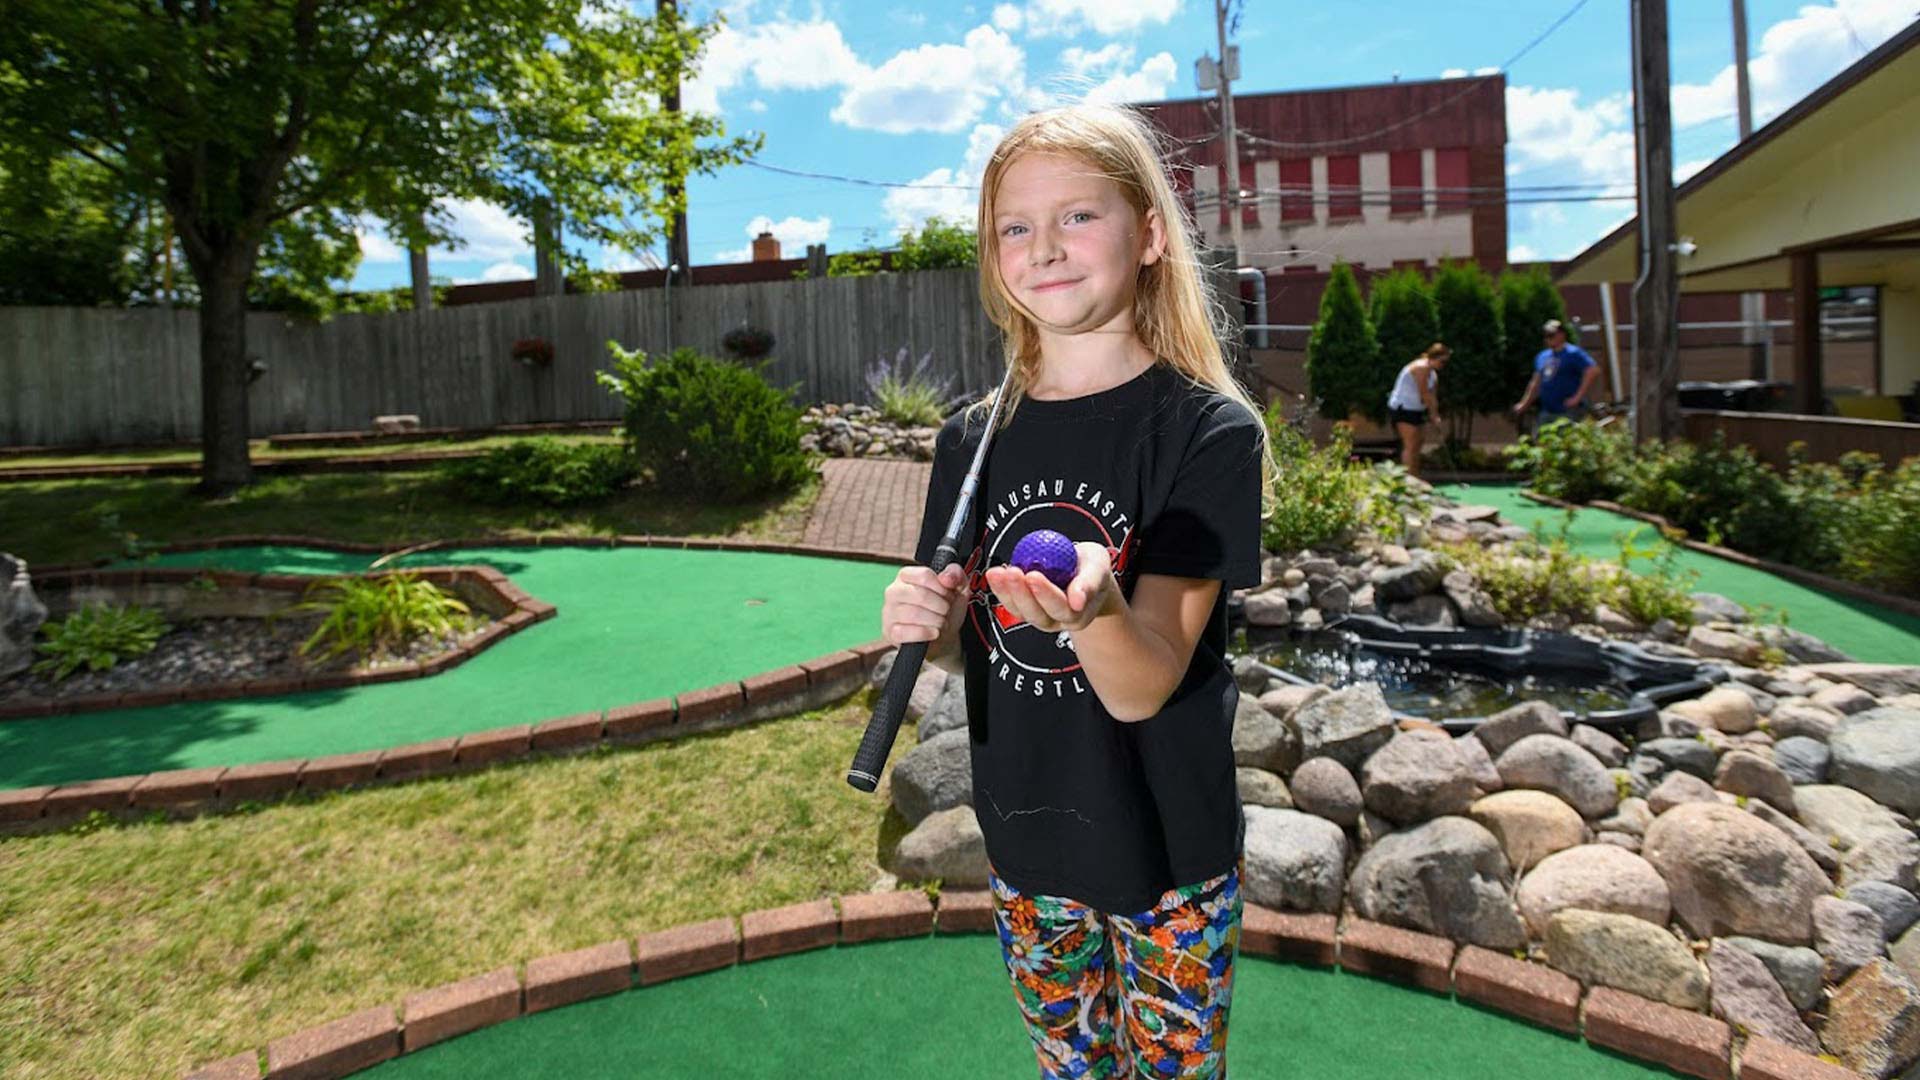 What to see & do in Oneida County | Girl holding a club and ball at Big Bear Mini Golf